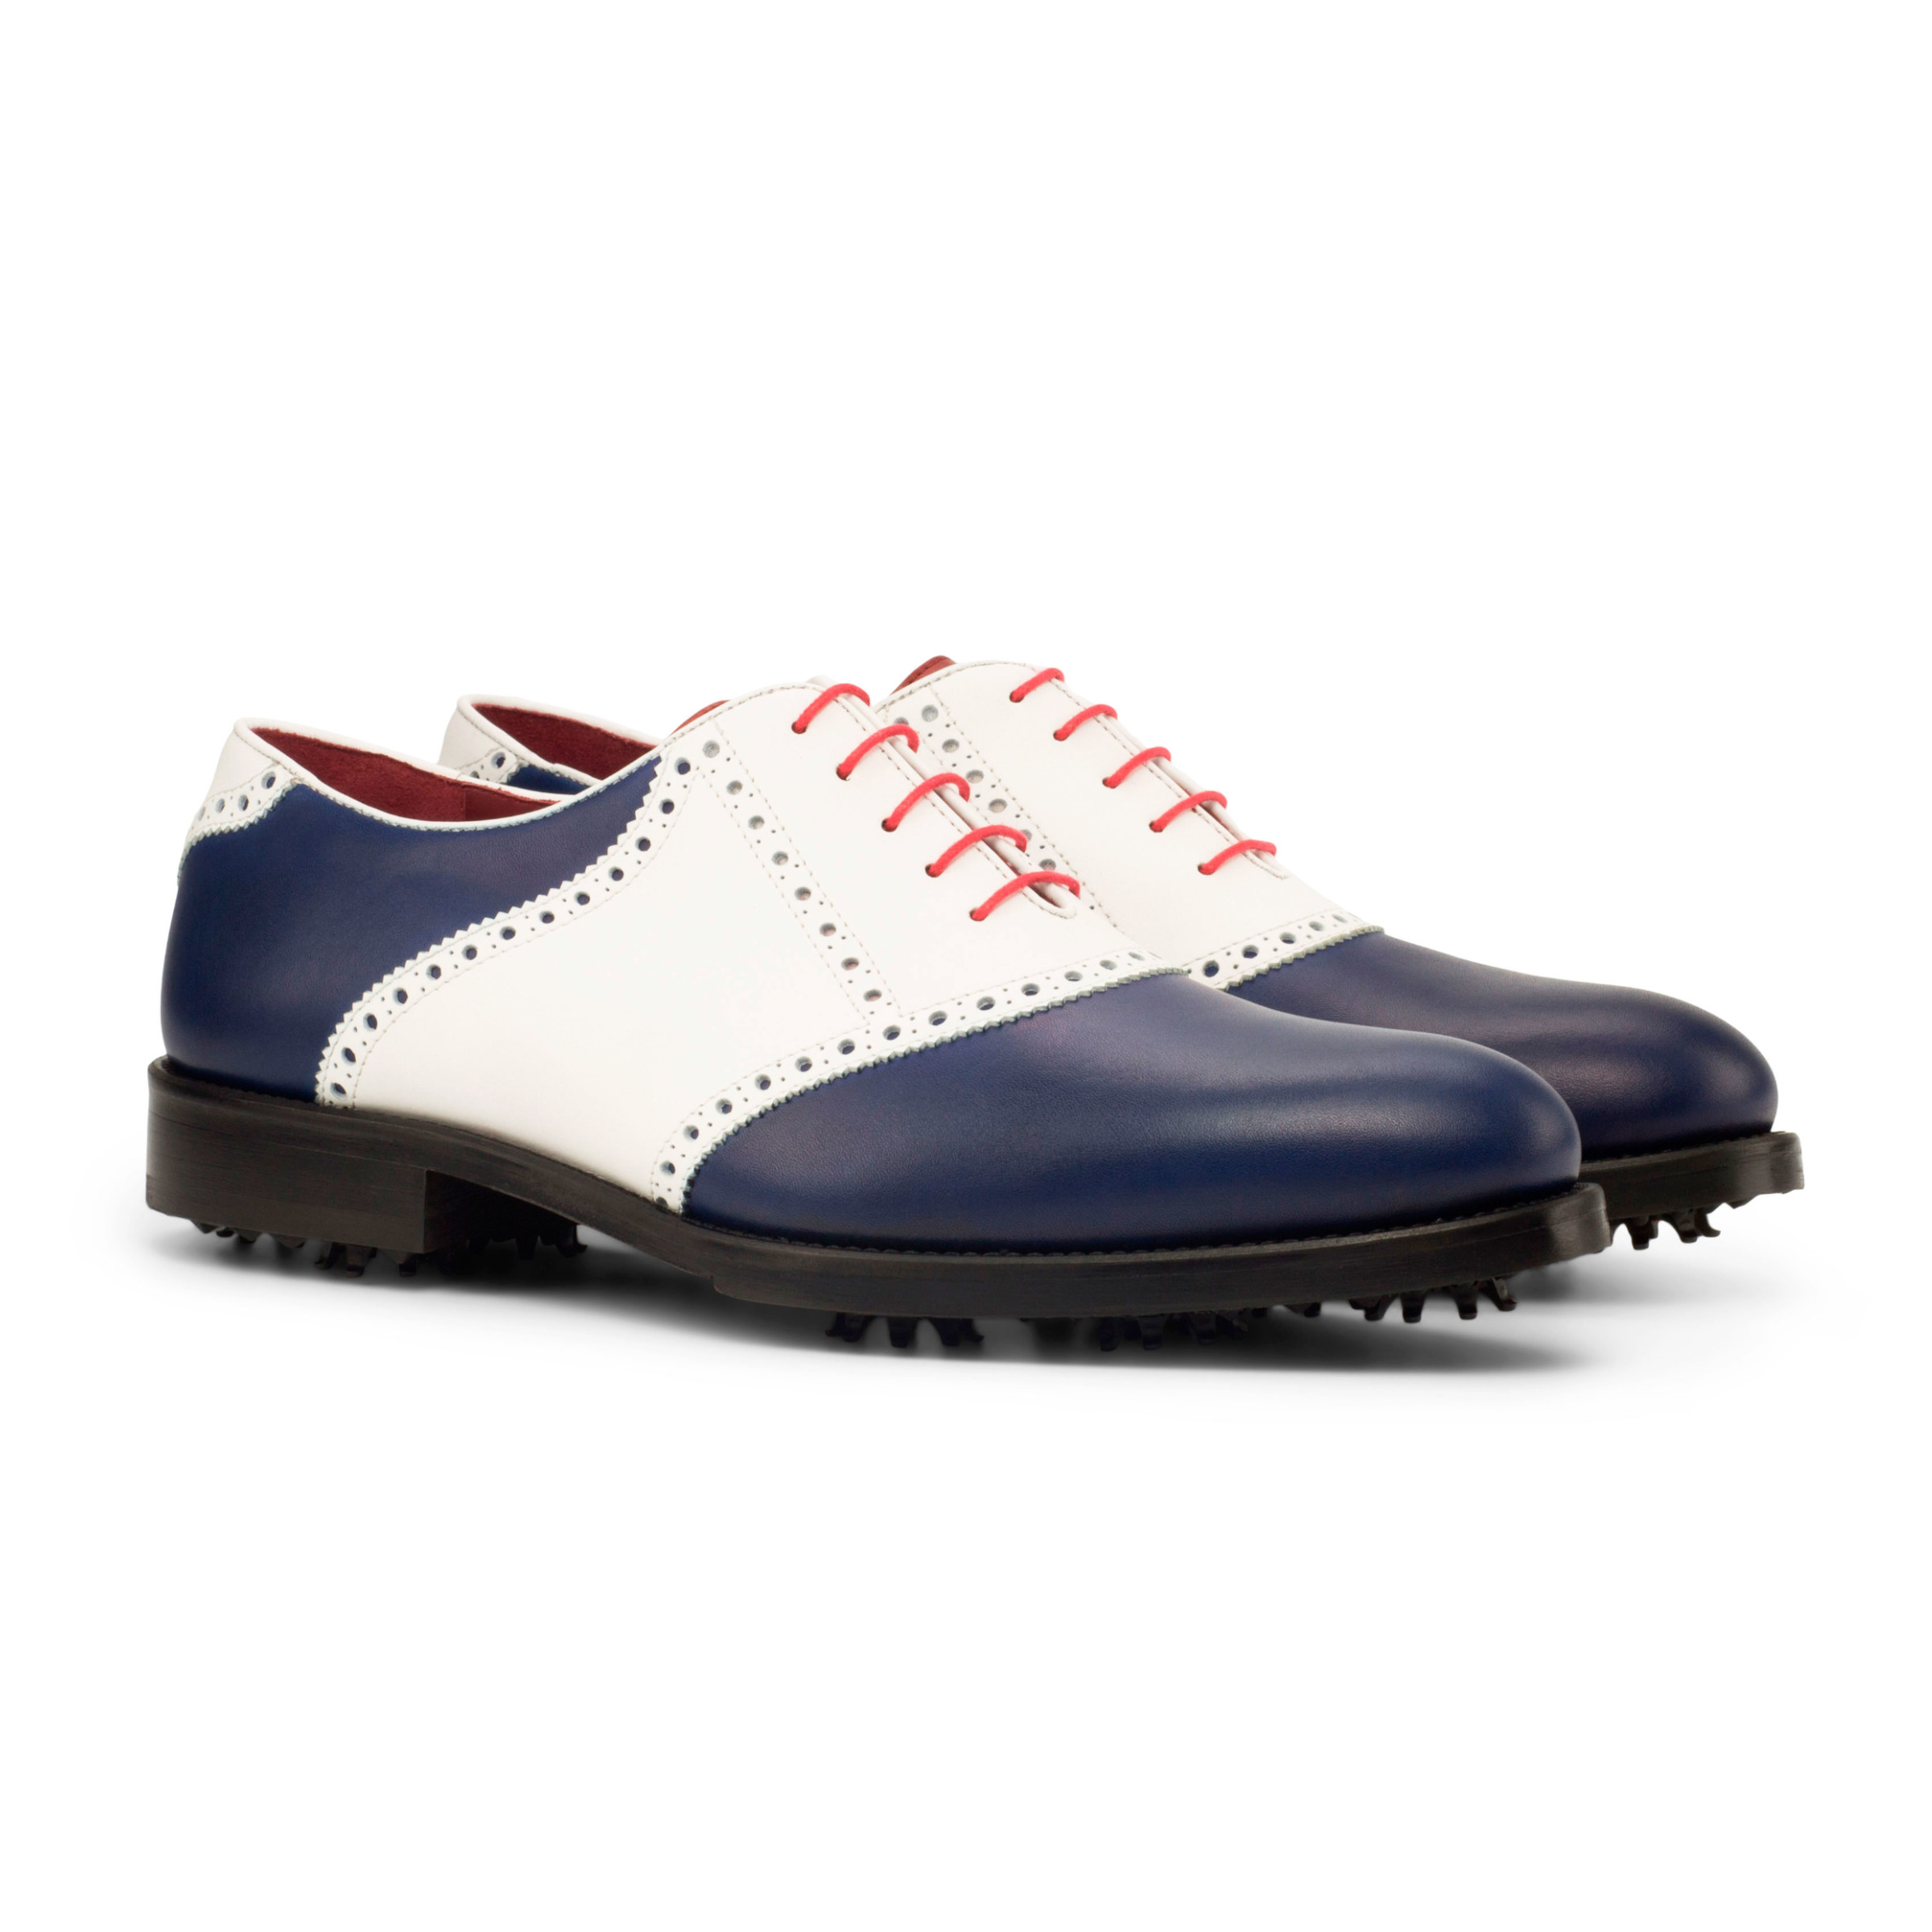 The Shetland Golf Shoe: Hero. white box calf, navy and red painted calf leather golf shoes